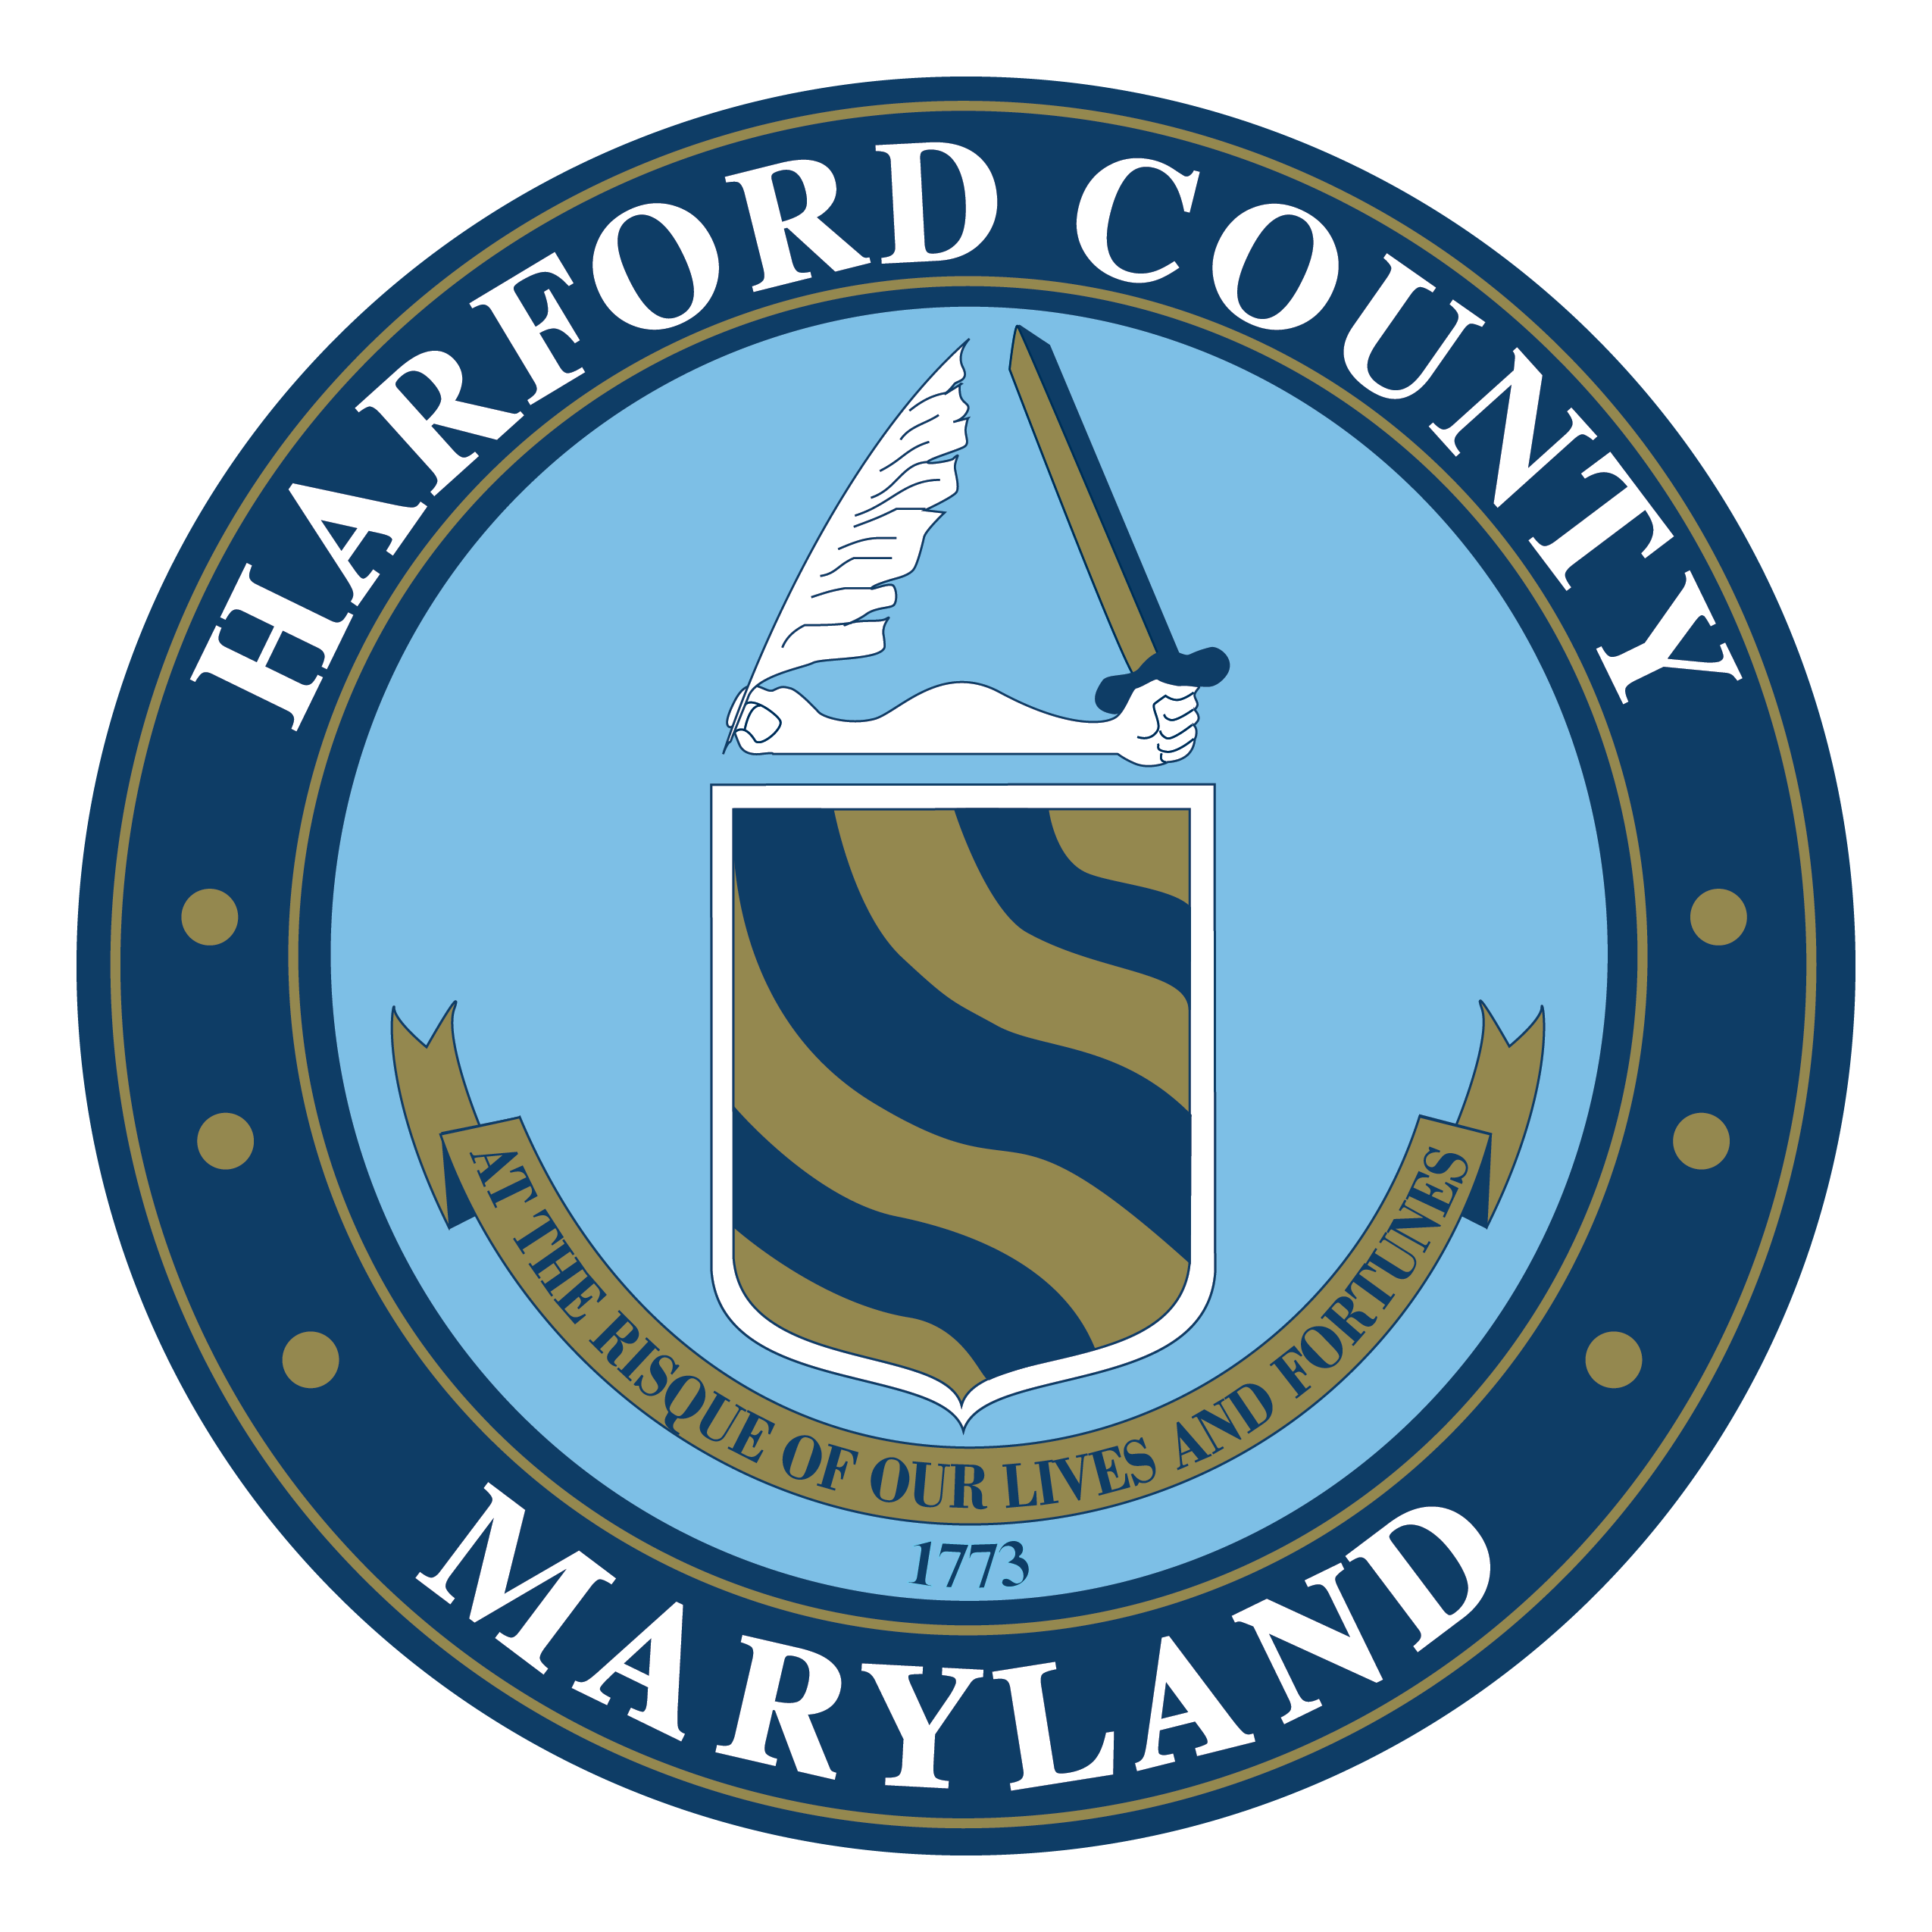 New County Seal